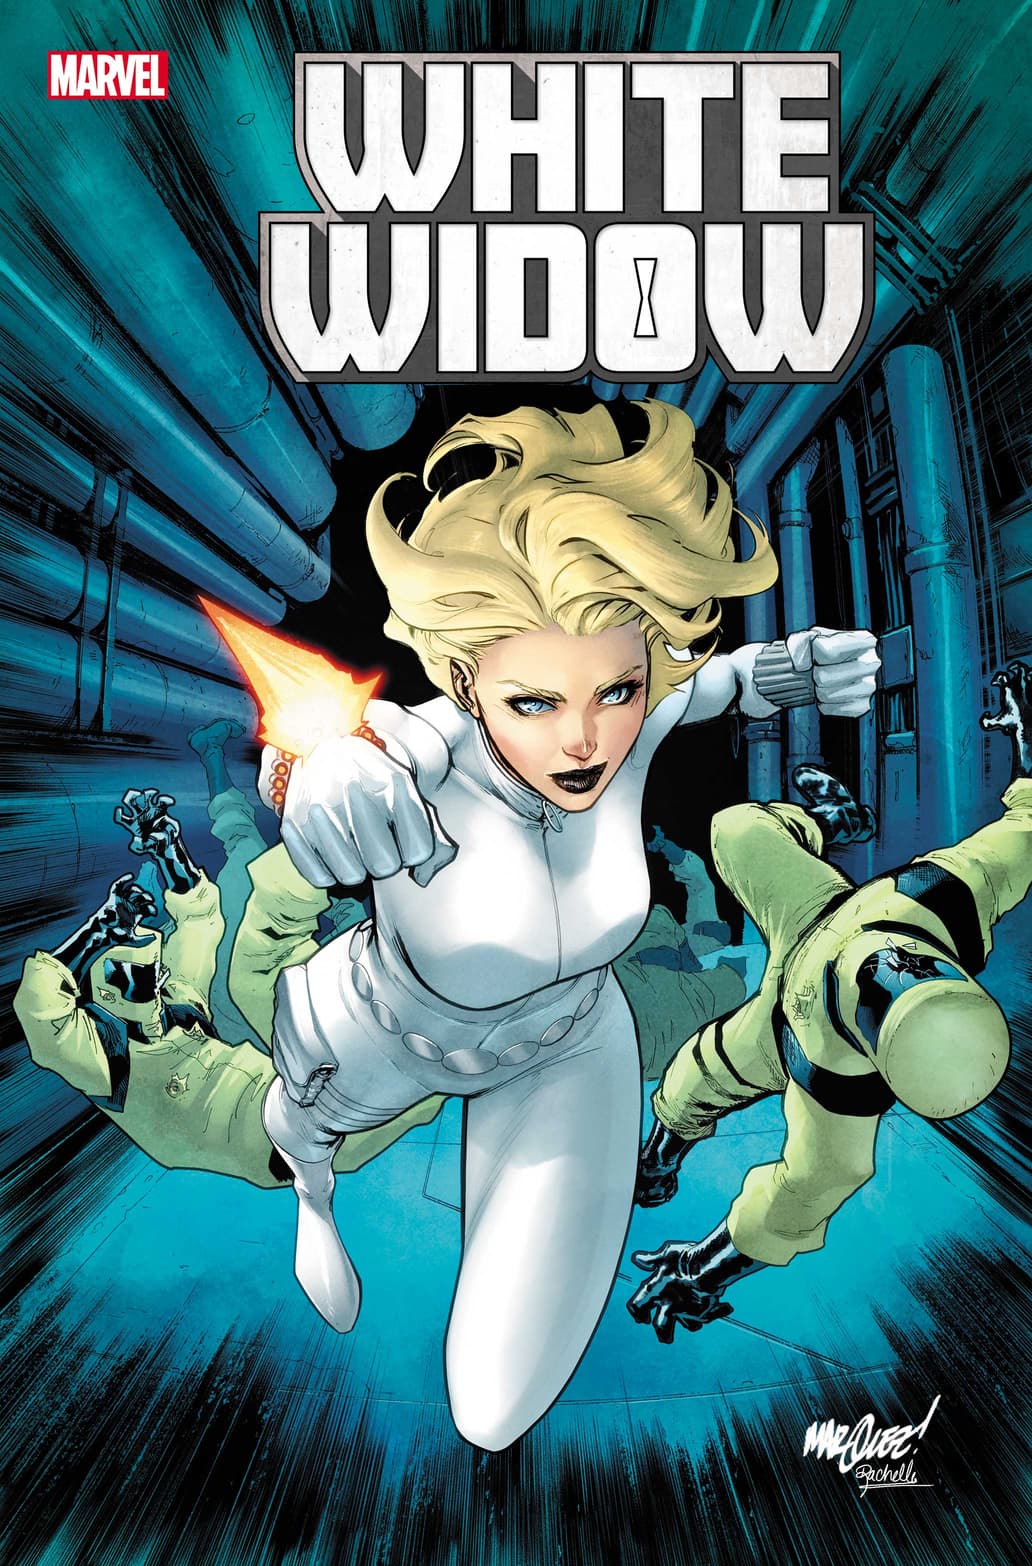 WHITE WIDOW #1 cover by David Marquez